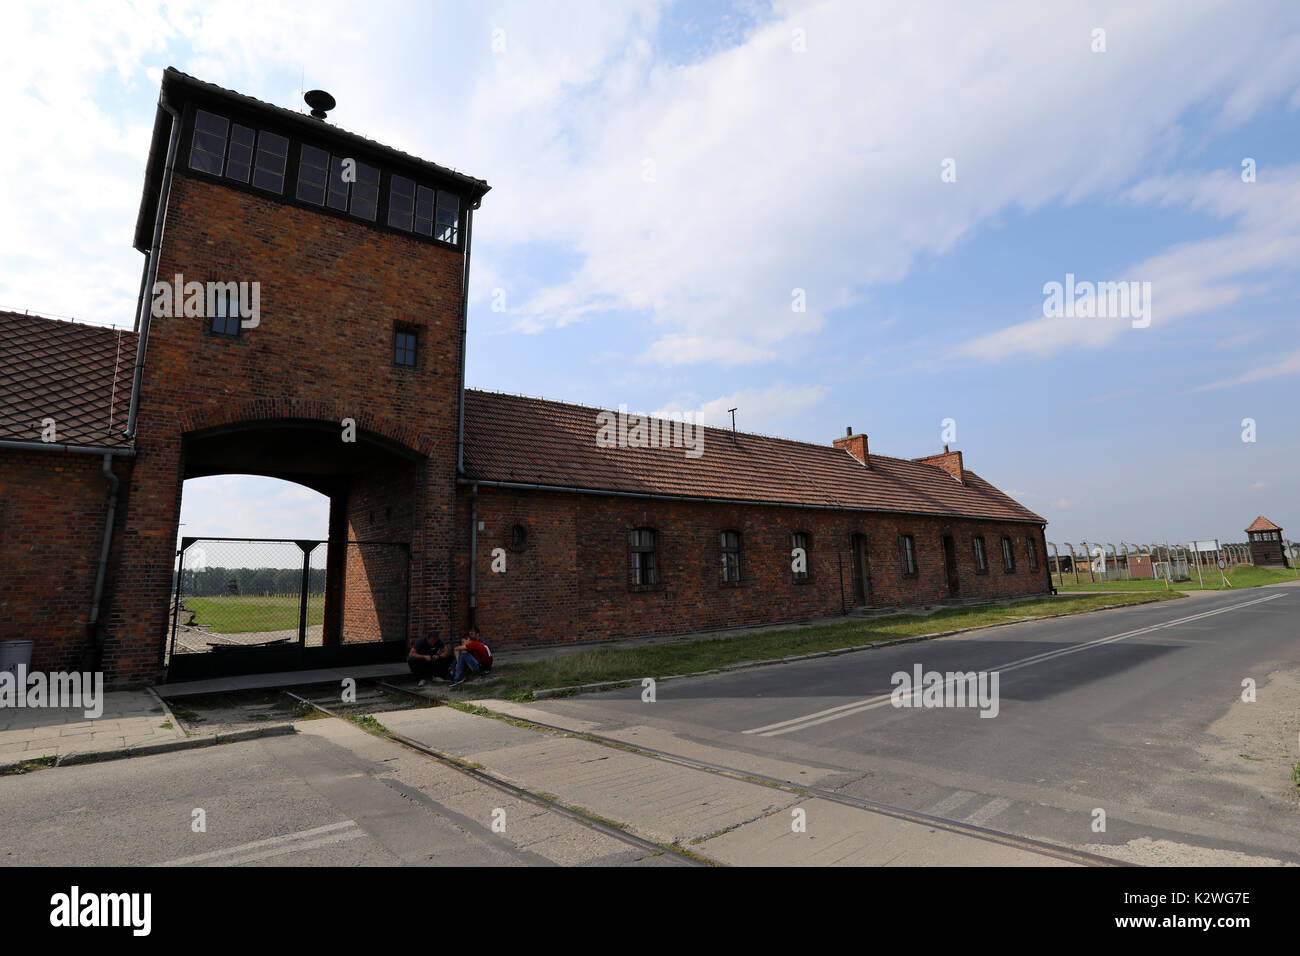 Rail lines run through the main entrance to the Nazi concentration camp of Auschwitz Birkenau, close to the town of Oświęcim, Poland, photographed on  Stock Photo